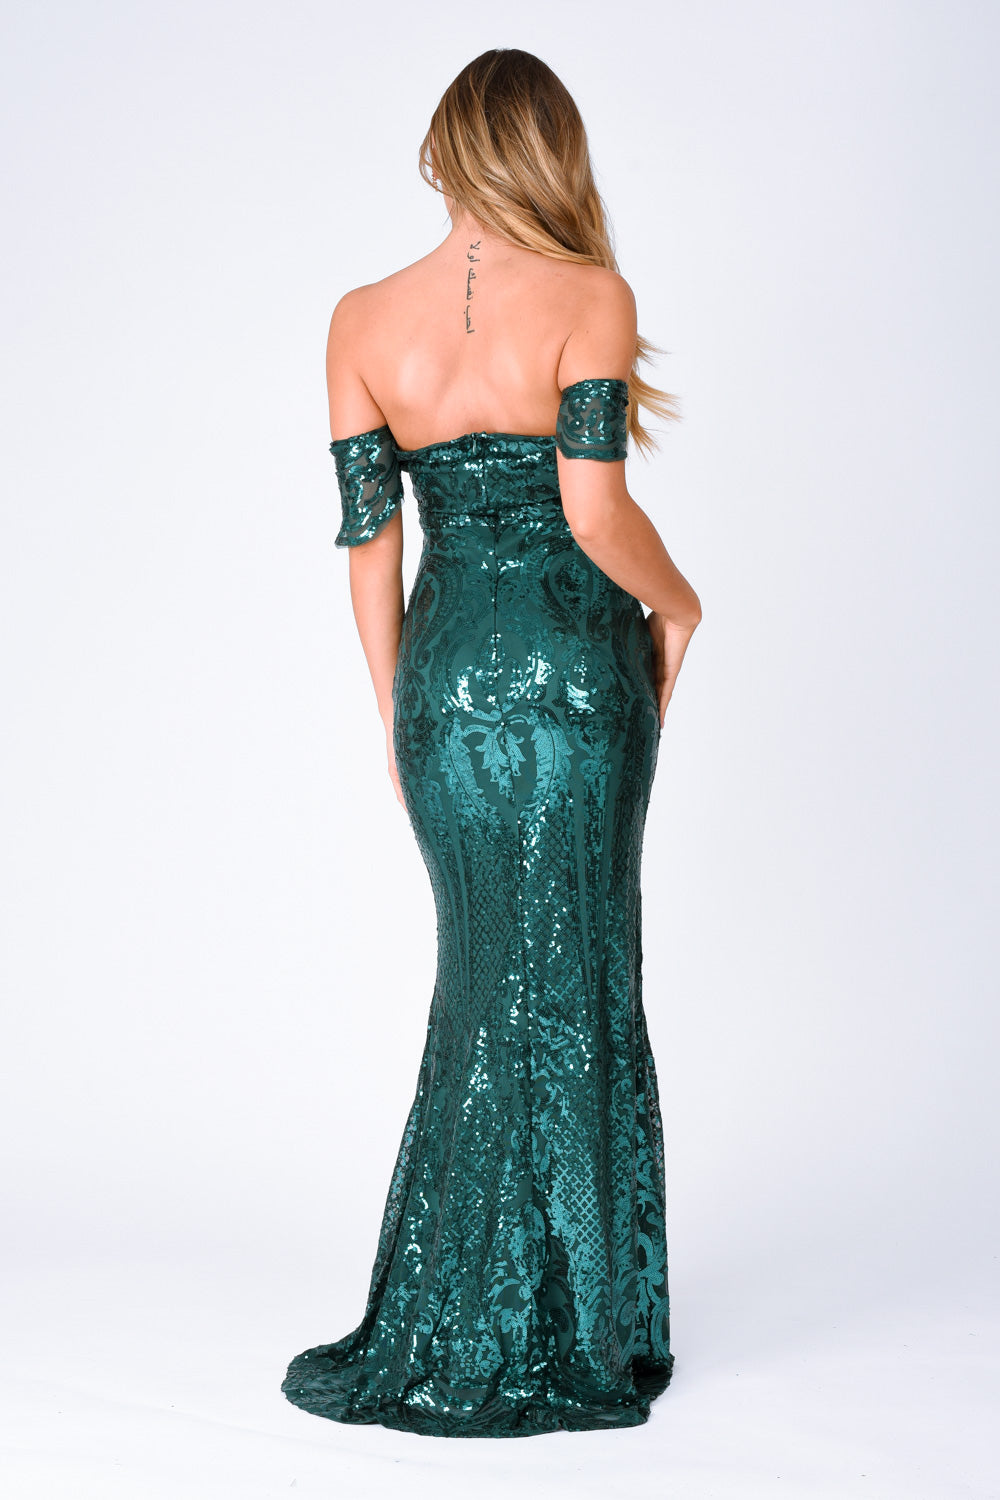 nazz collection sweetheart plunge sequin embellished bardot off the shoulder maxi fishtail mermaid dress emerald green